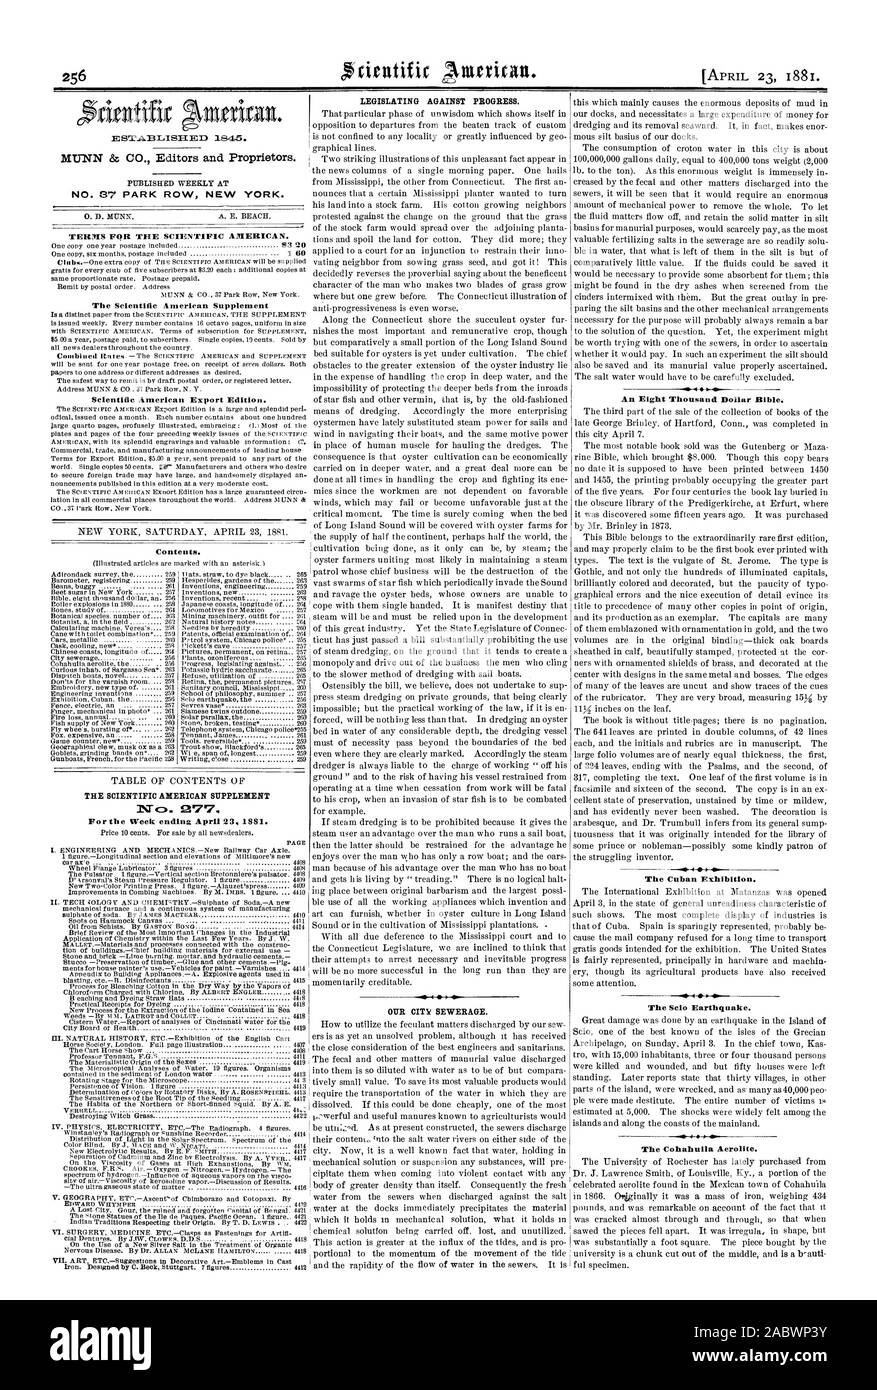 MUNN & CO. Editors and Proprietors. NO. 87 PARK ROW NEW YORK. TERMS FOR THE SCIENTIFIC AMERICAN. The Scientific American Supplement Scientific American Export Edition. Contents. THE SCIENTIFIC AMERICAN SUPPLEMENT 277. For the Week endina April 23 1881. PAGE 1LEGISLATING AGAINST PROGRESS. OUR CITY SEWERAGE. An Eight Thousand Dollar Bible. The Cuban Exhibition. The Selo Earthquake. 41 4  0 The Cokahuila Aerolite., 1881-04-23 Stock Photo